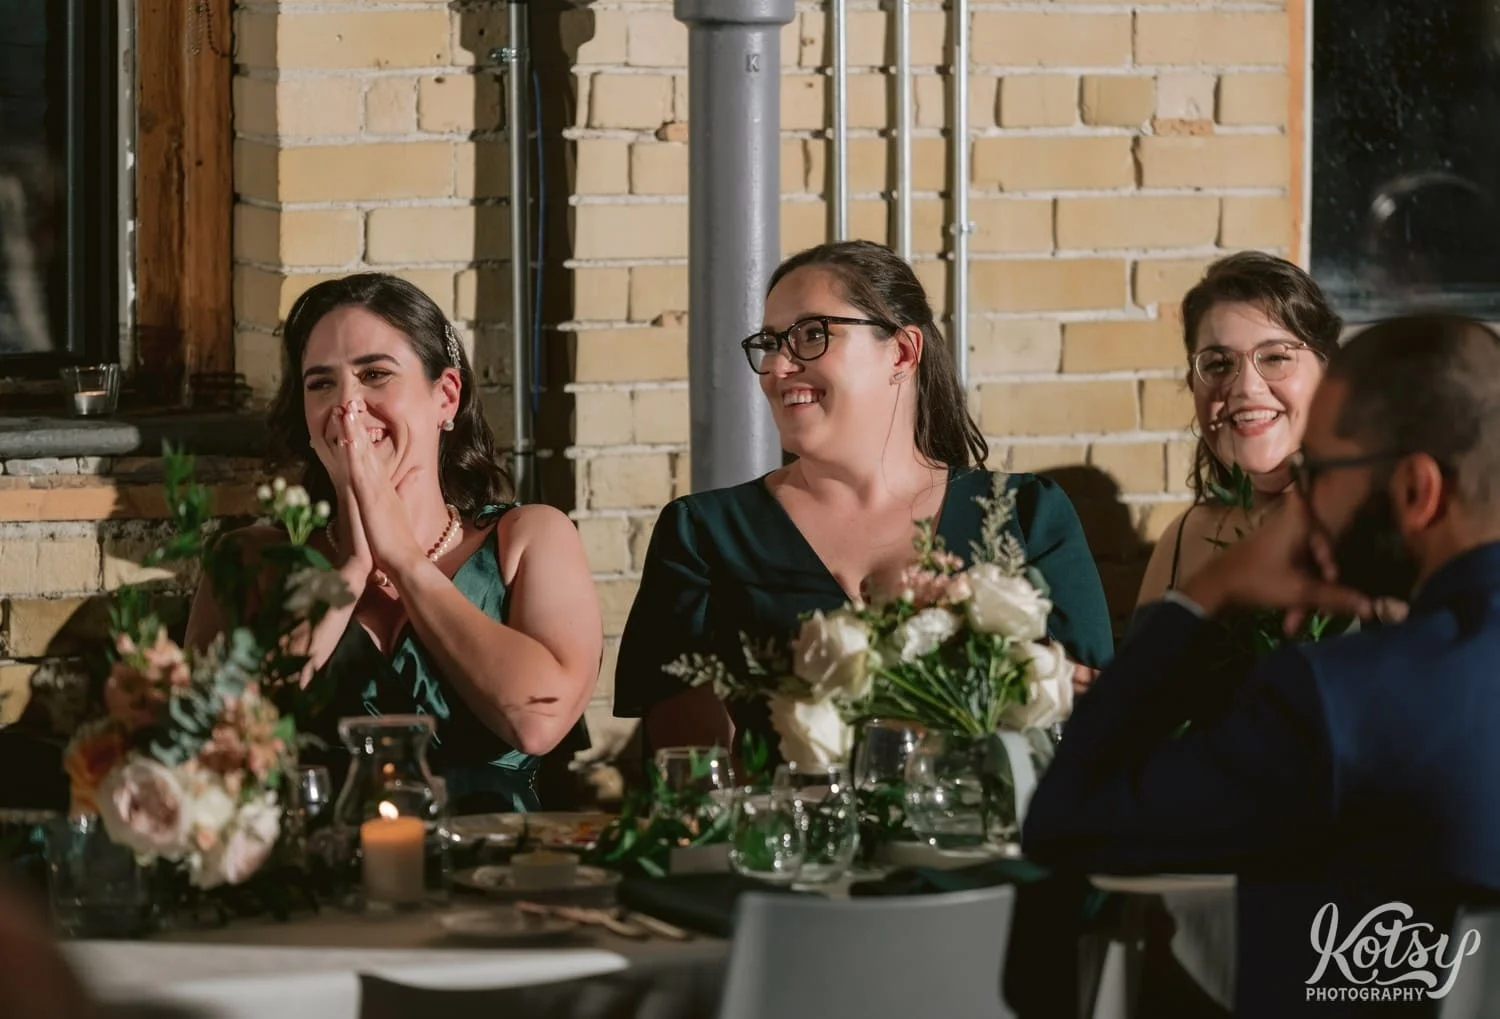 Three women in green dresses sitting down at a dinner table smile big in reaction to someone speaking off camera at a Second Floor Events wedding reception in Toronto, Canada.